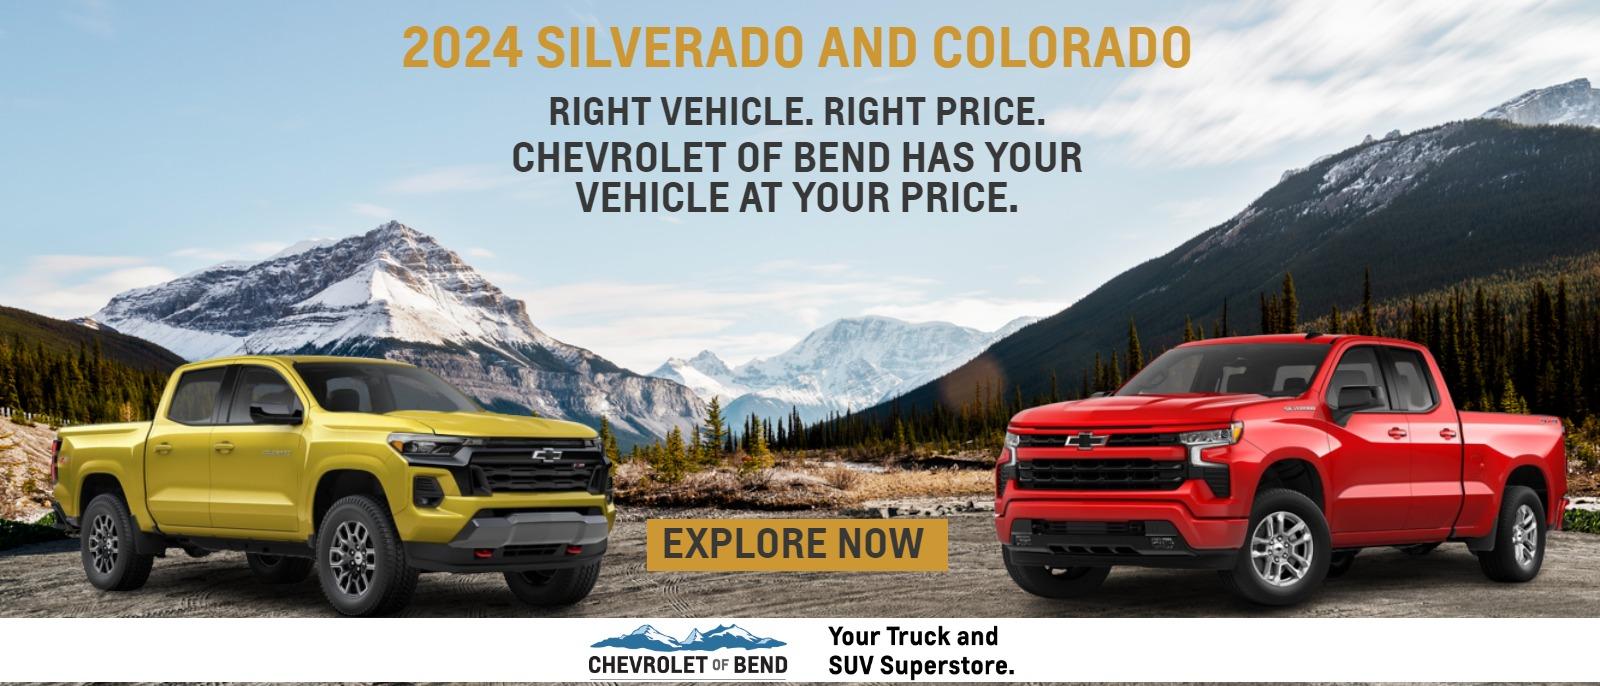 Right Vehicle. Right Price
Chevrolet of Bend has your vehicle at your price.
Explore Now